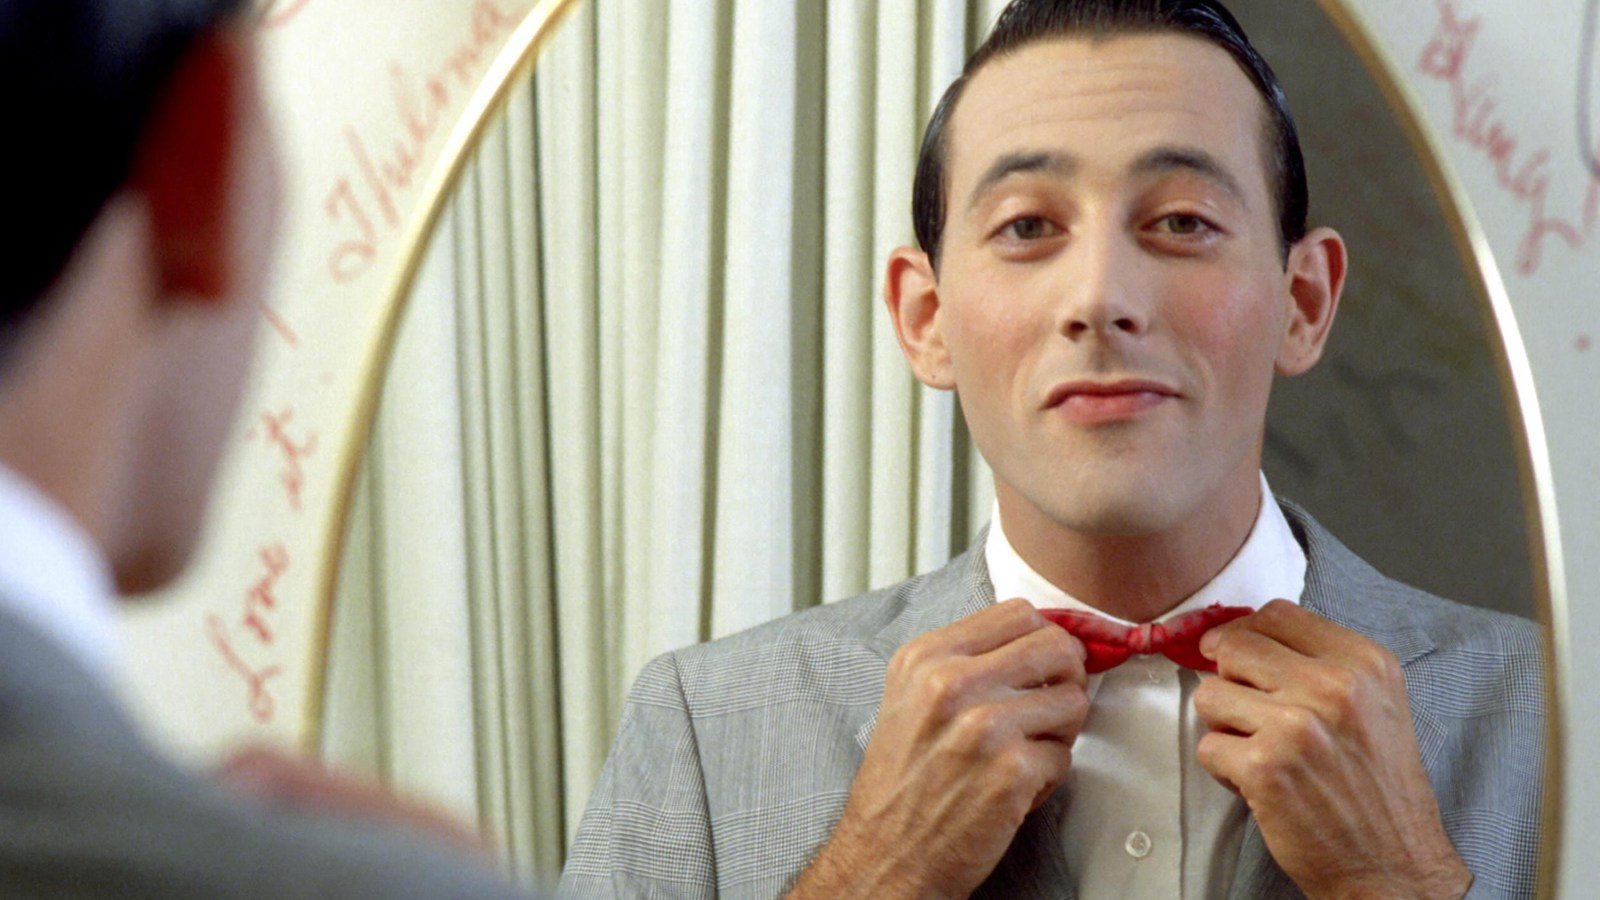 From Pee-wee Herman to '30 Rock': Paul Reubens' Best On-Screen Moments